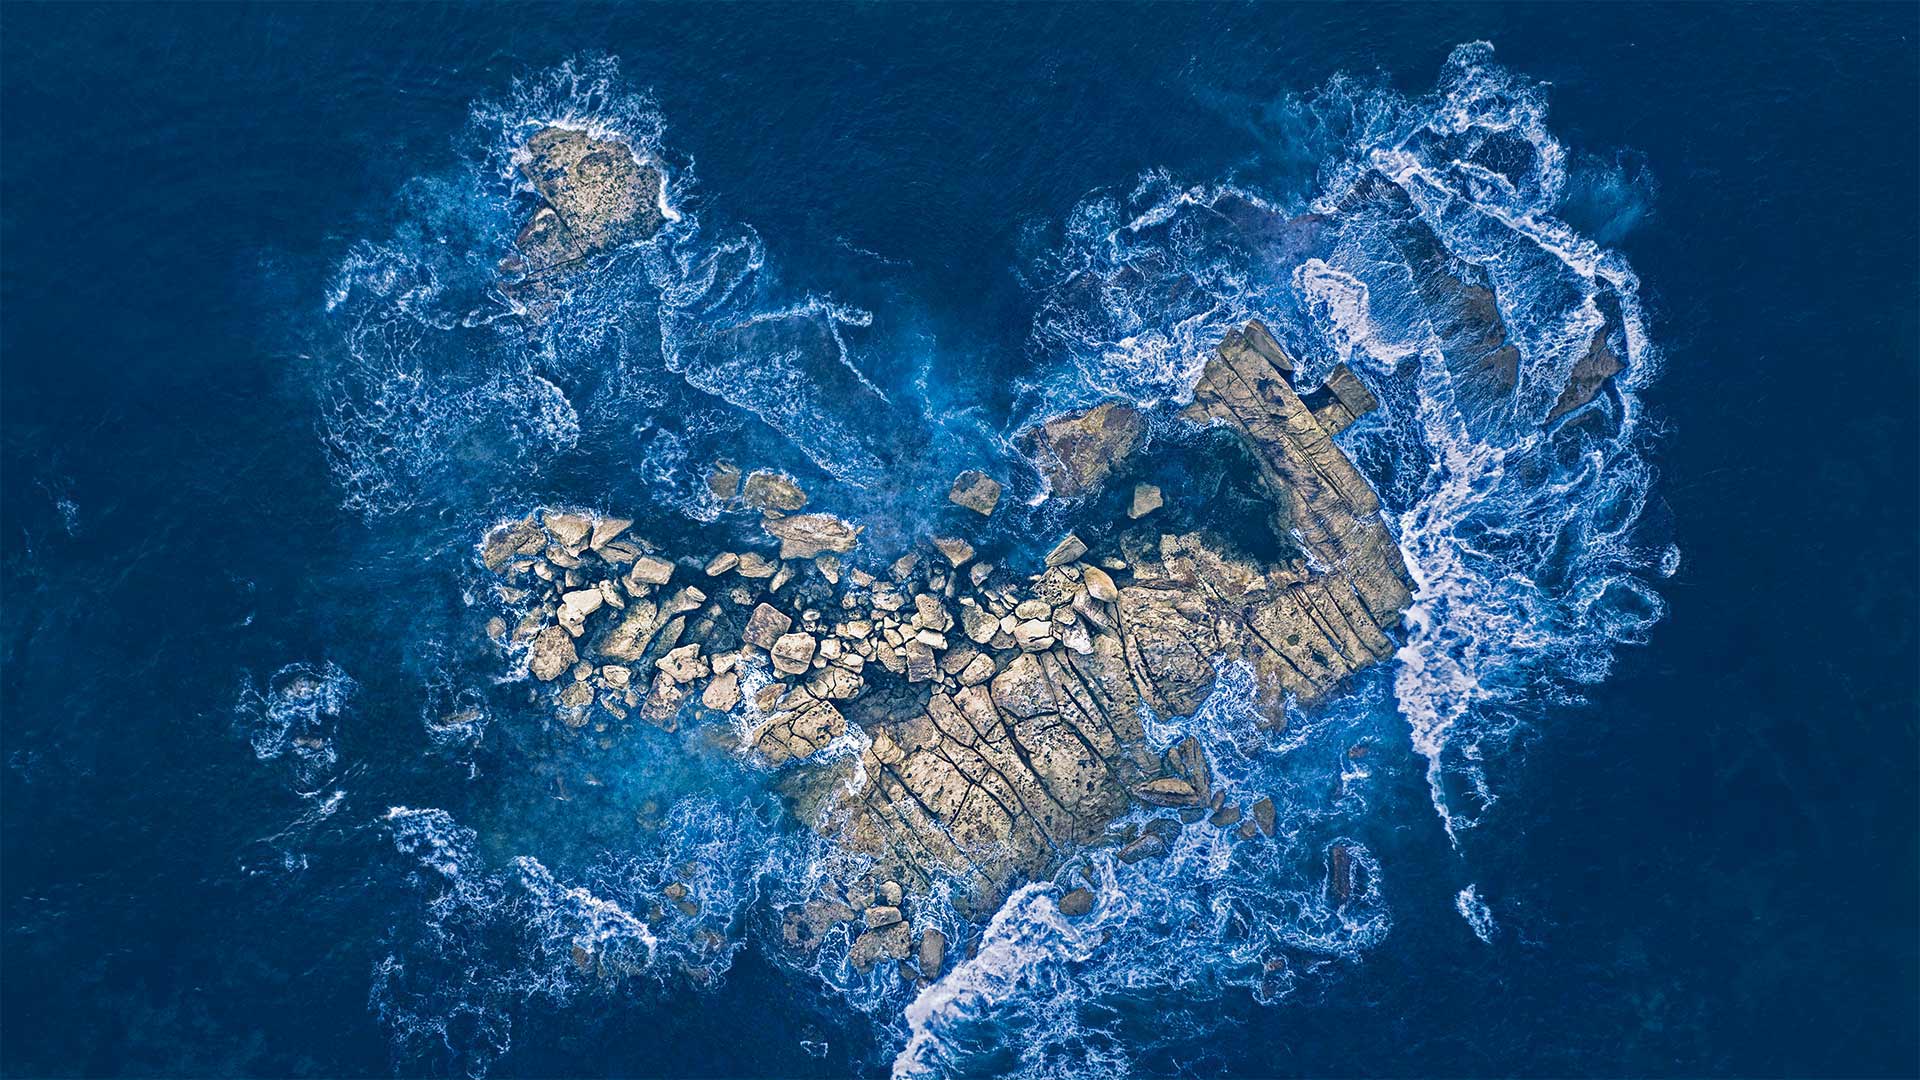 Ocean waves crashing over a heart-shaped rock island off the coast of Sydney, Australia - Kristian Bell/Getty Images)